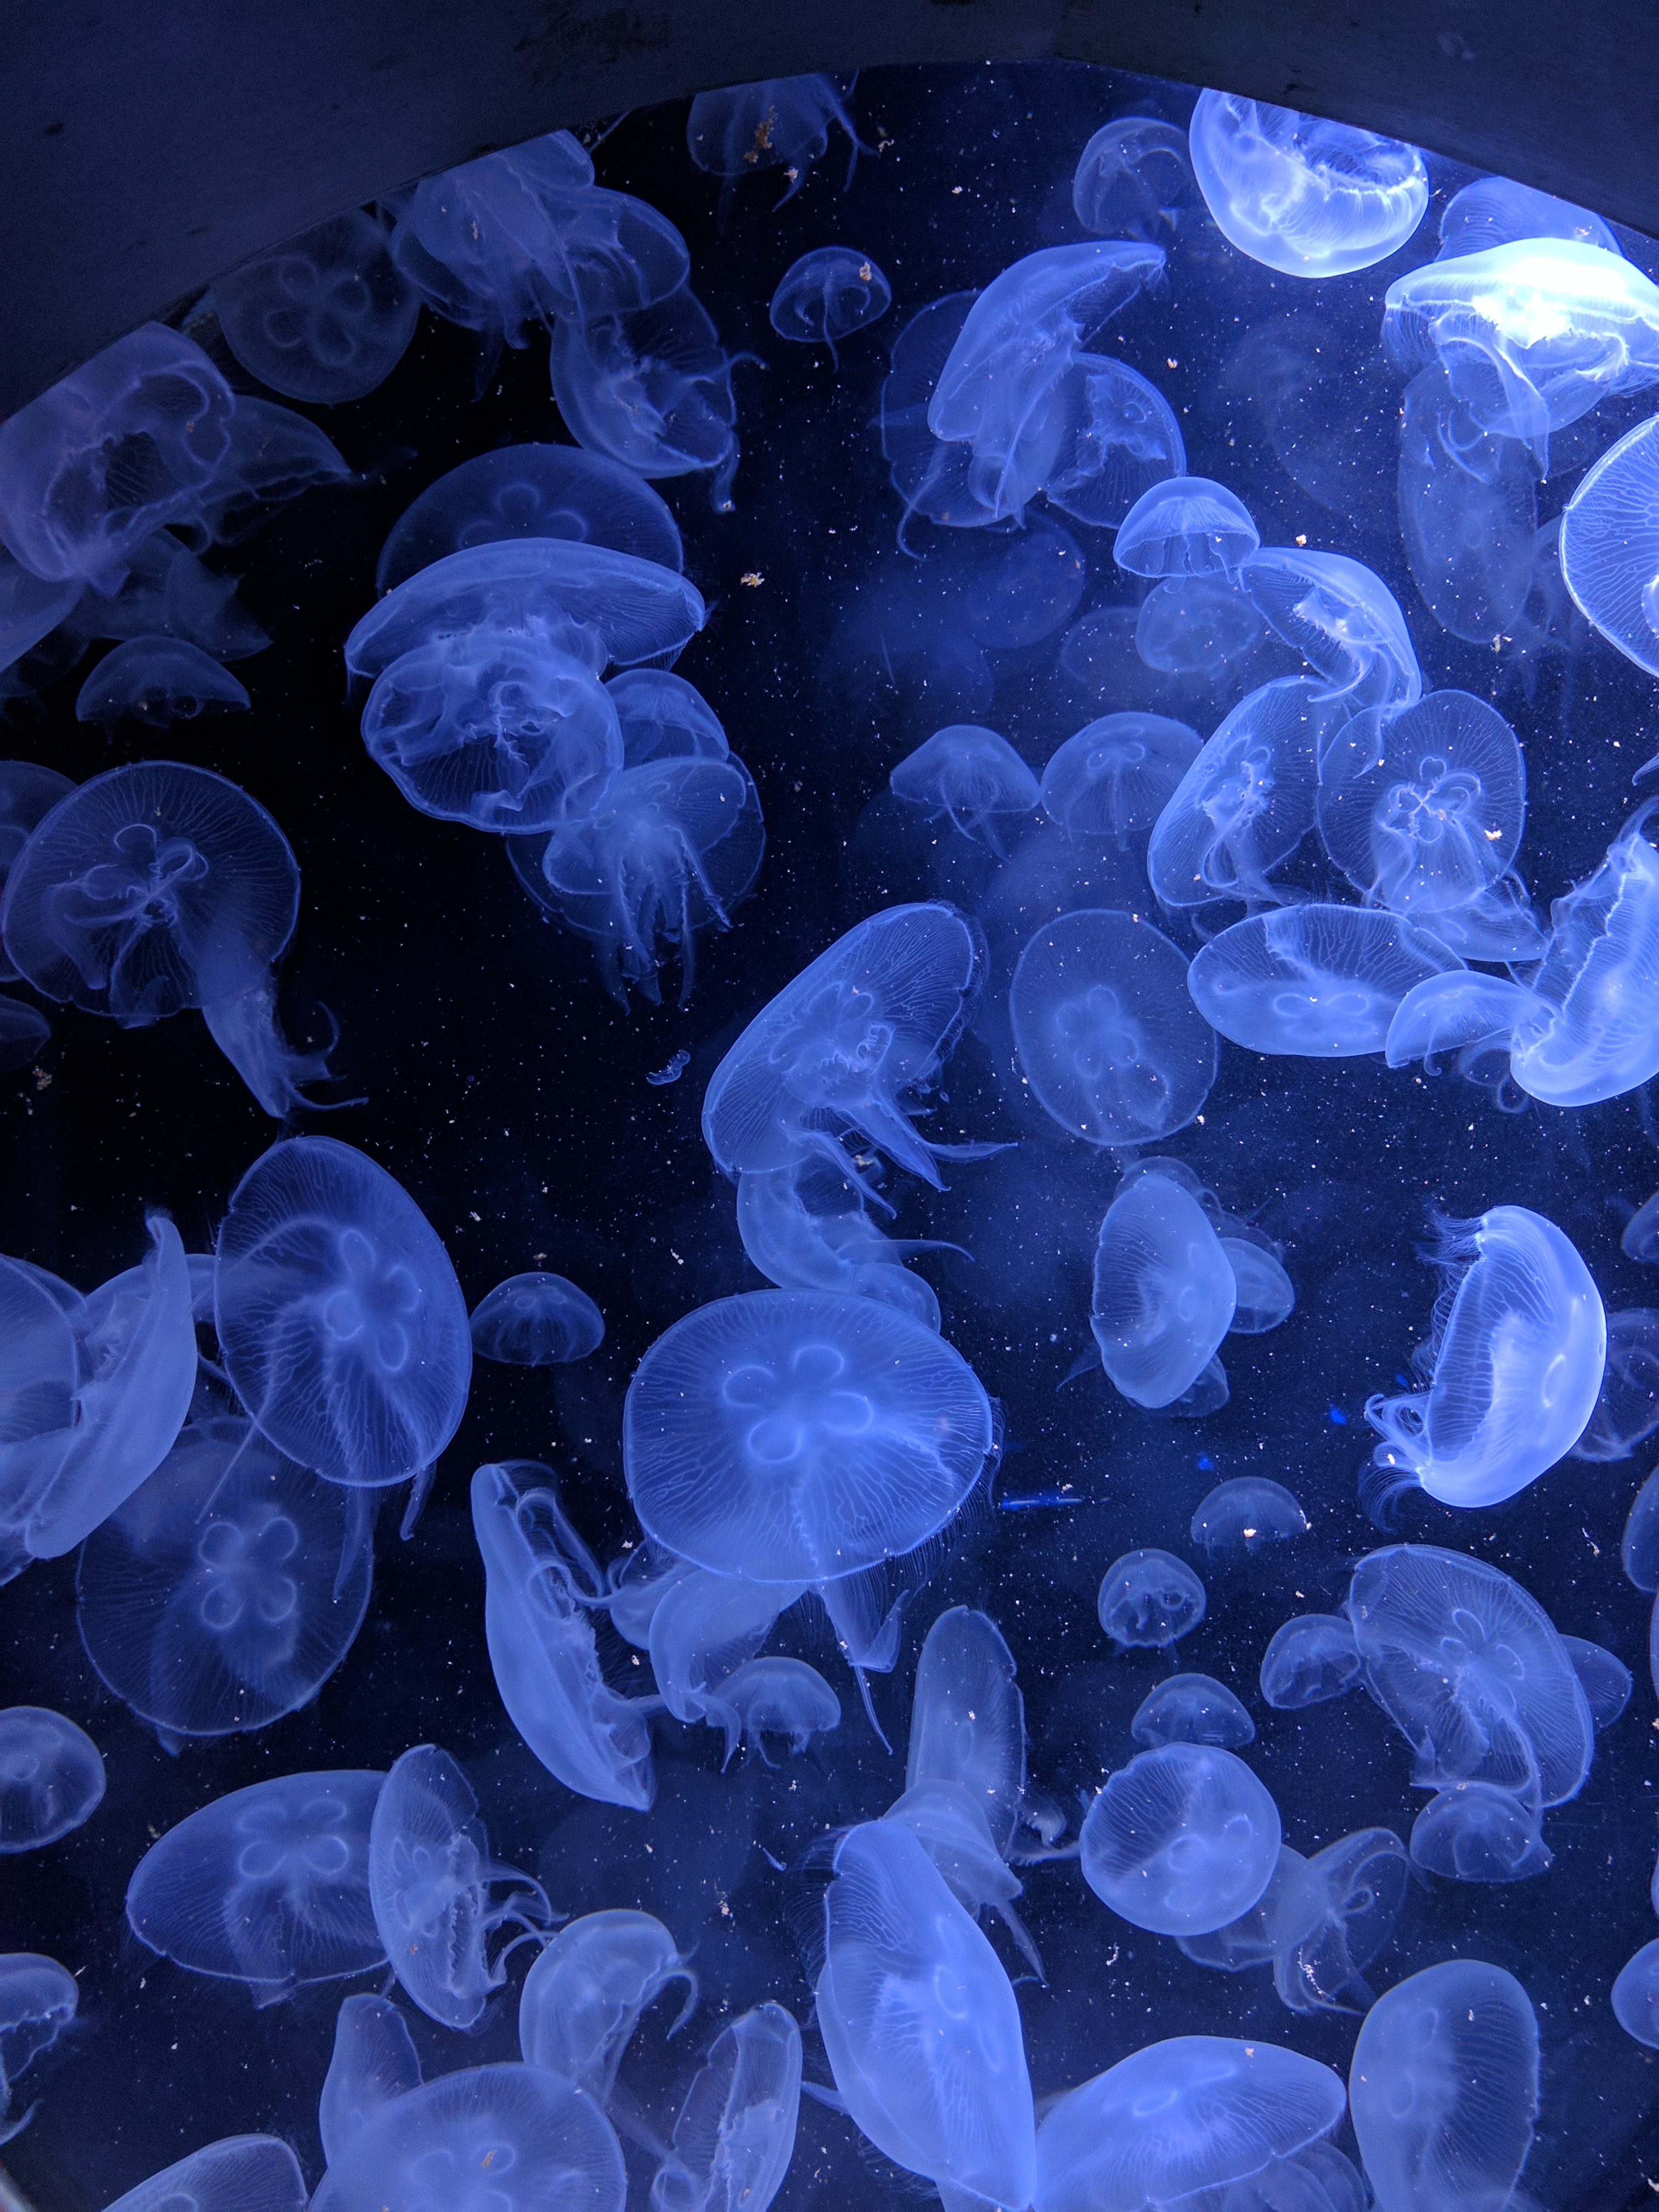 20 fascinating facts about jellyfish